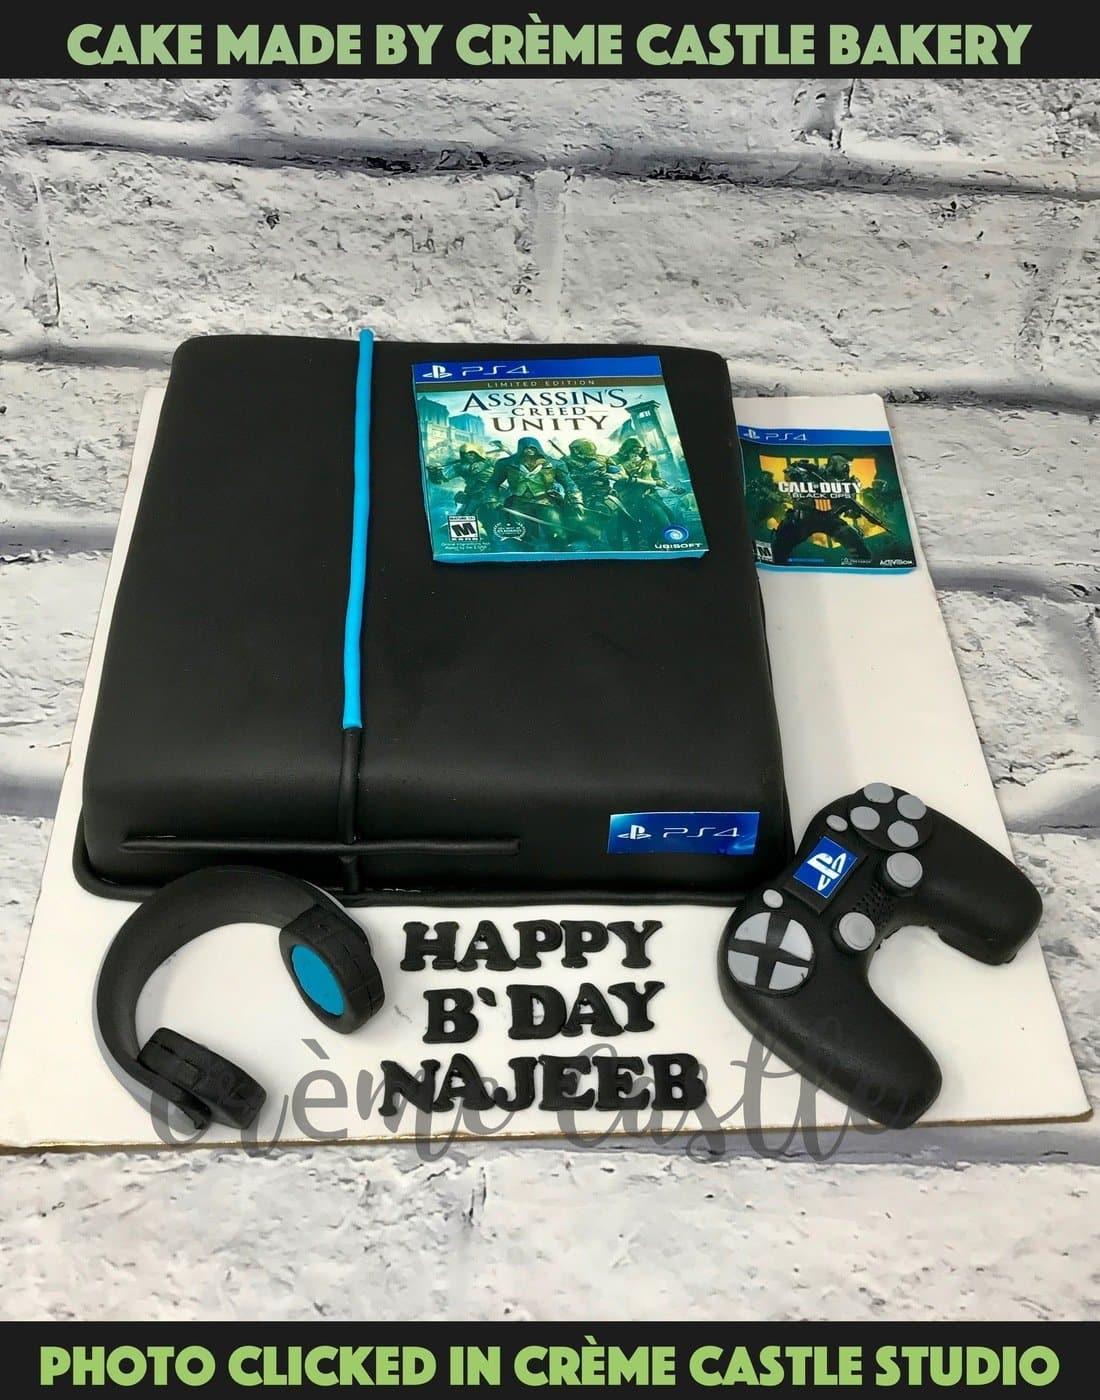 Play Station Theme Cakes - Creme Castle